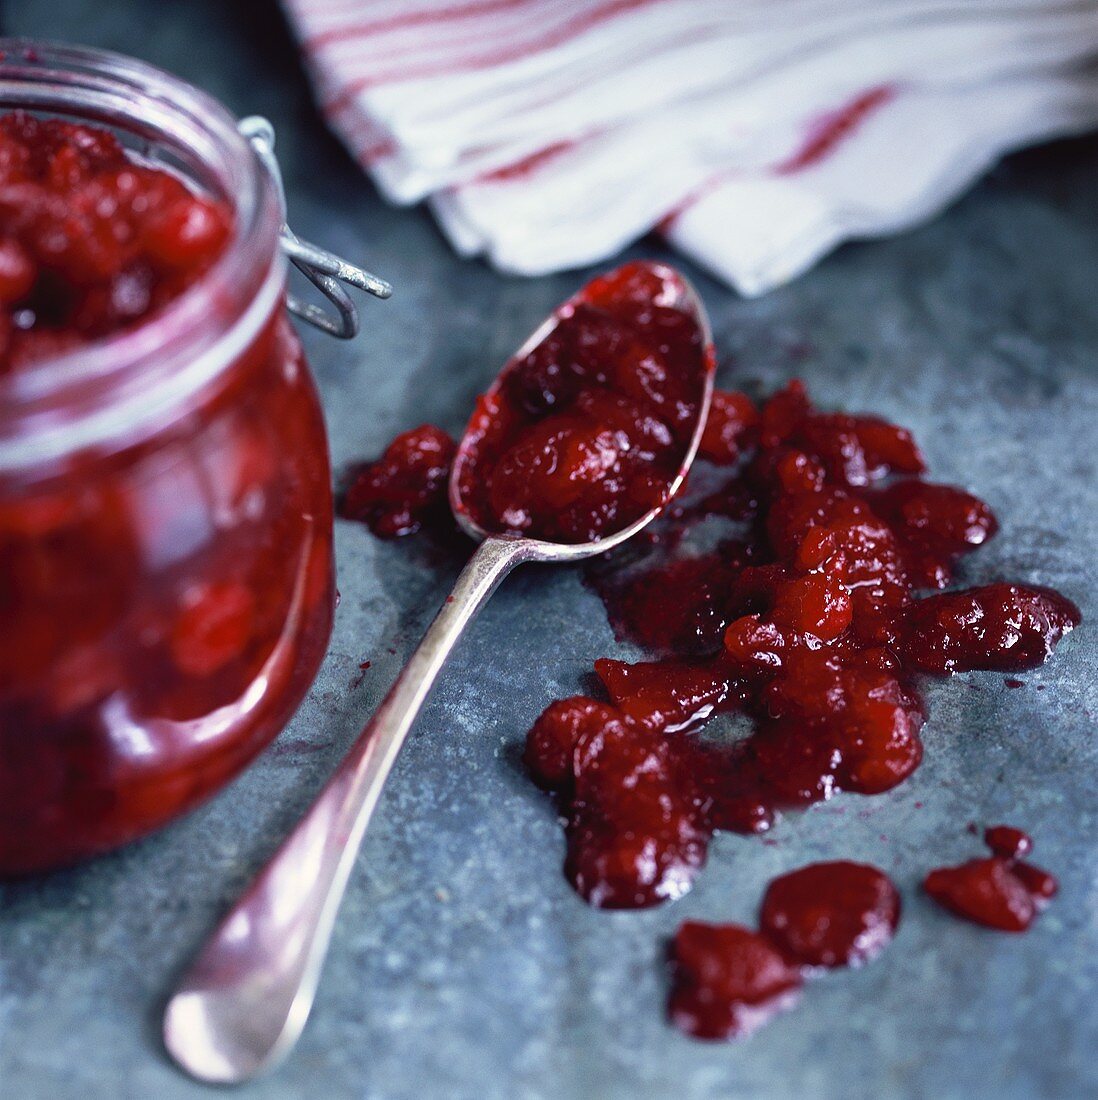 Cranberry relish in preserving jar and on spoon